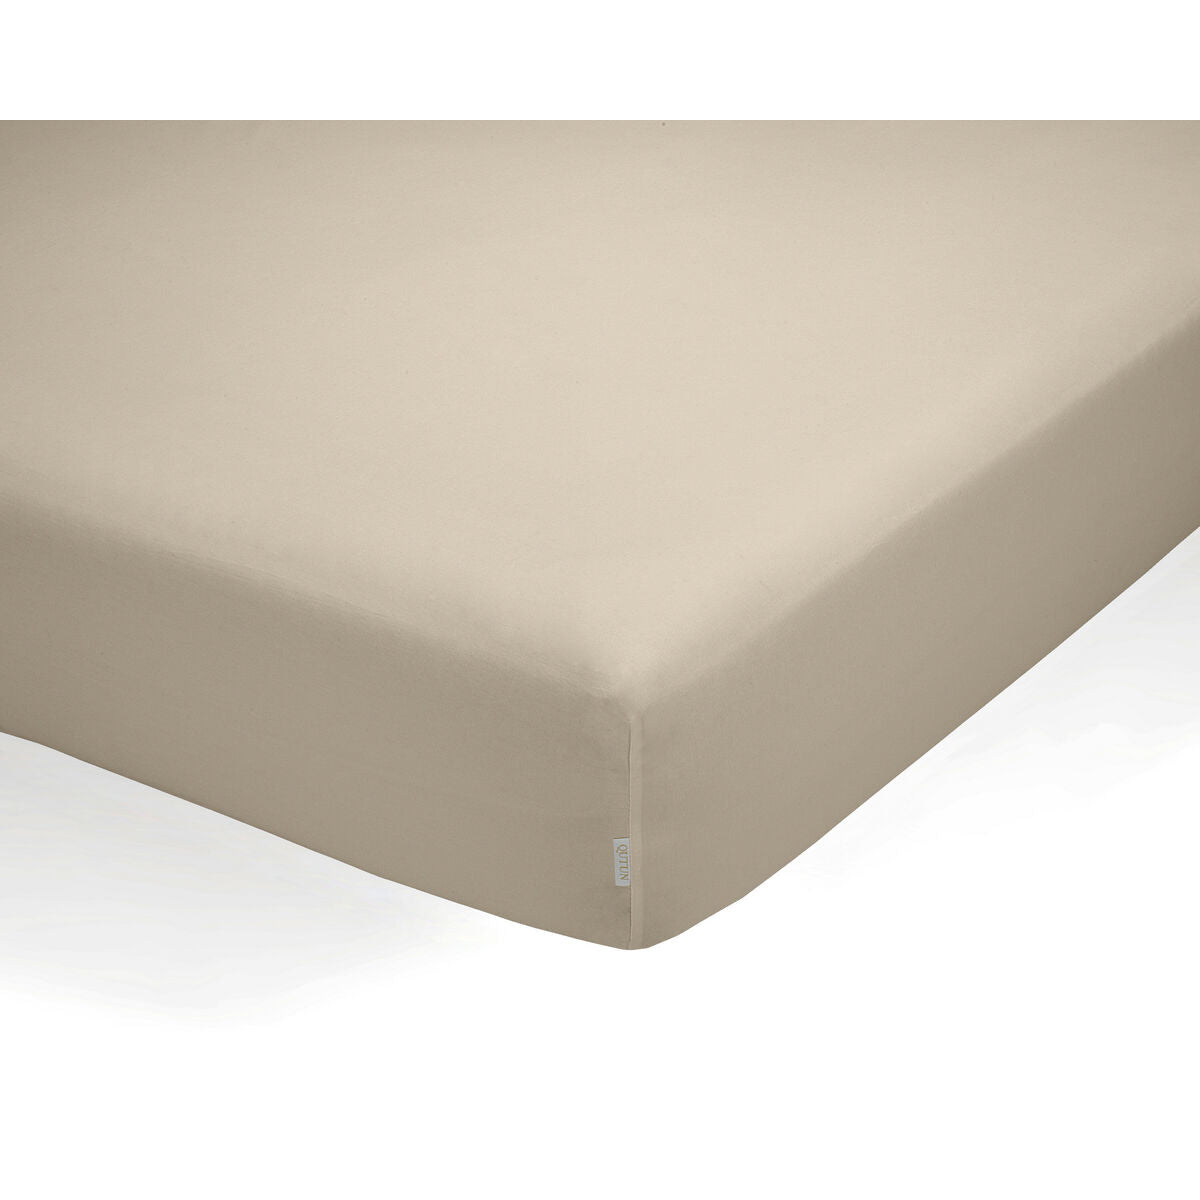 Sheet Play Alexandra House Living Quot BEIGE BED 1 Personal 3 pezzi